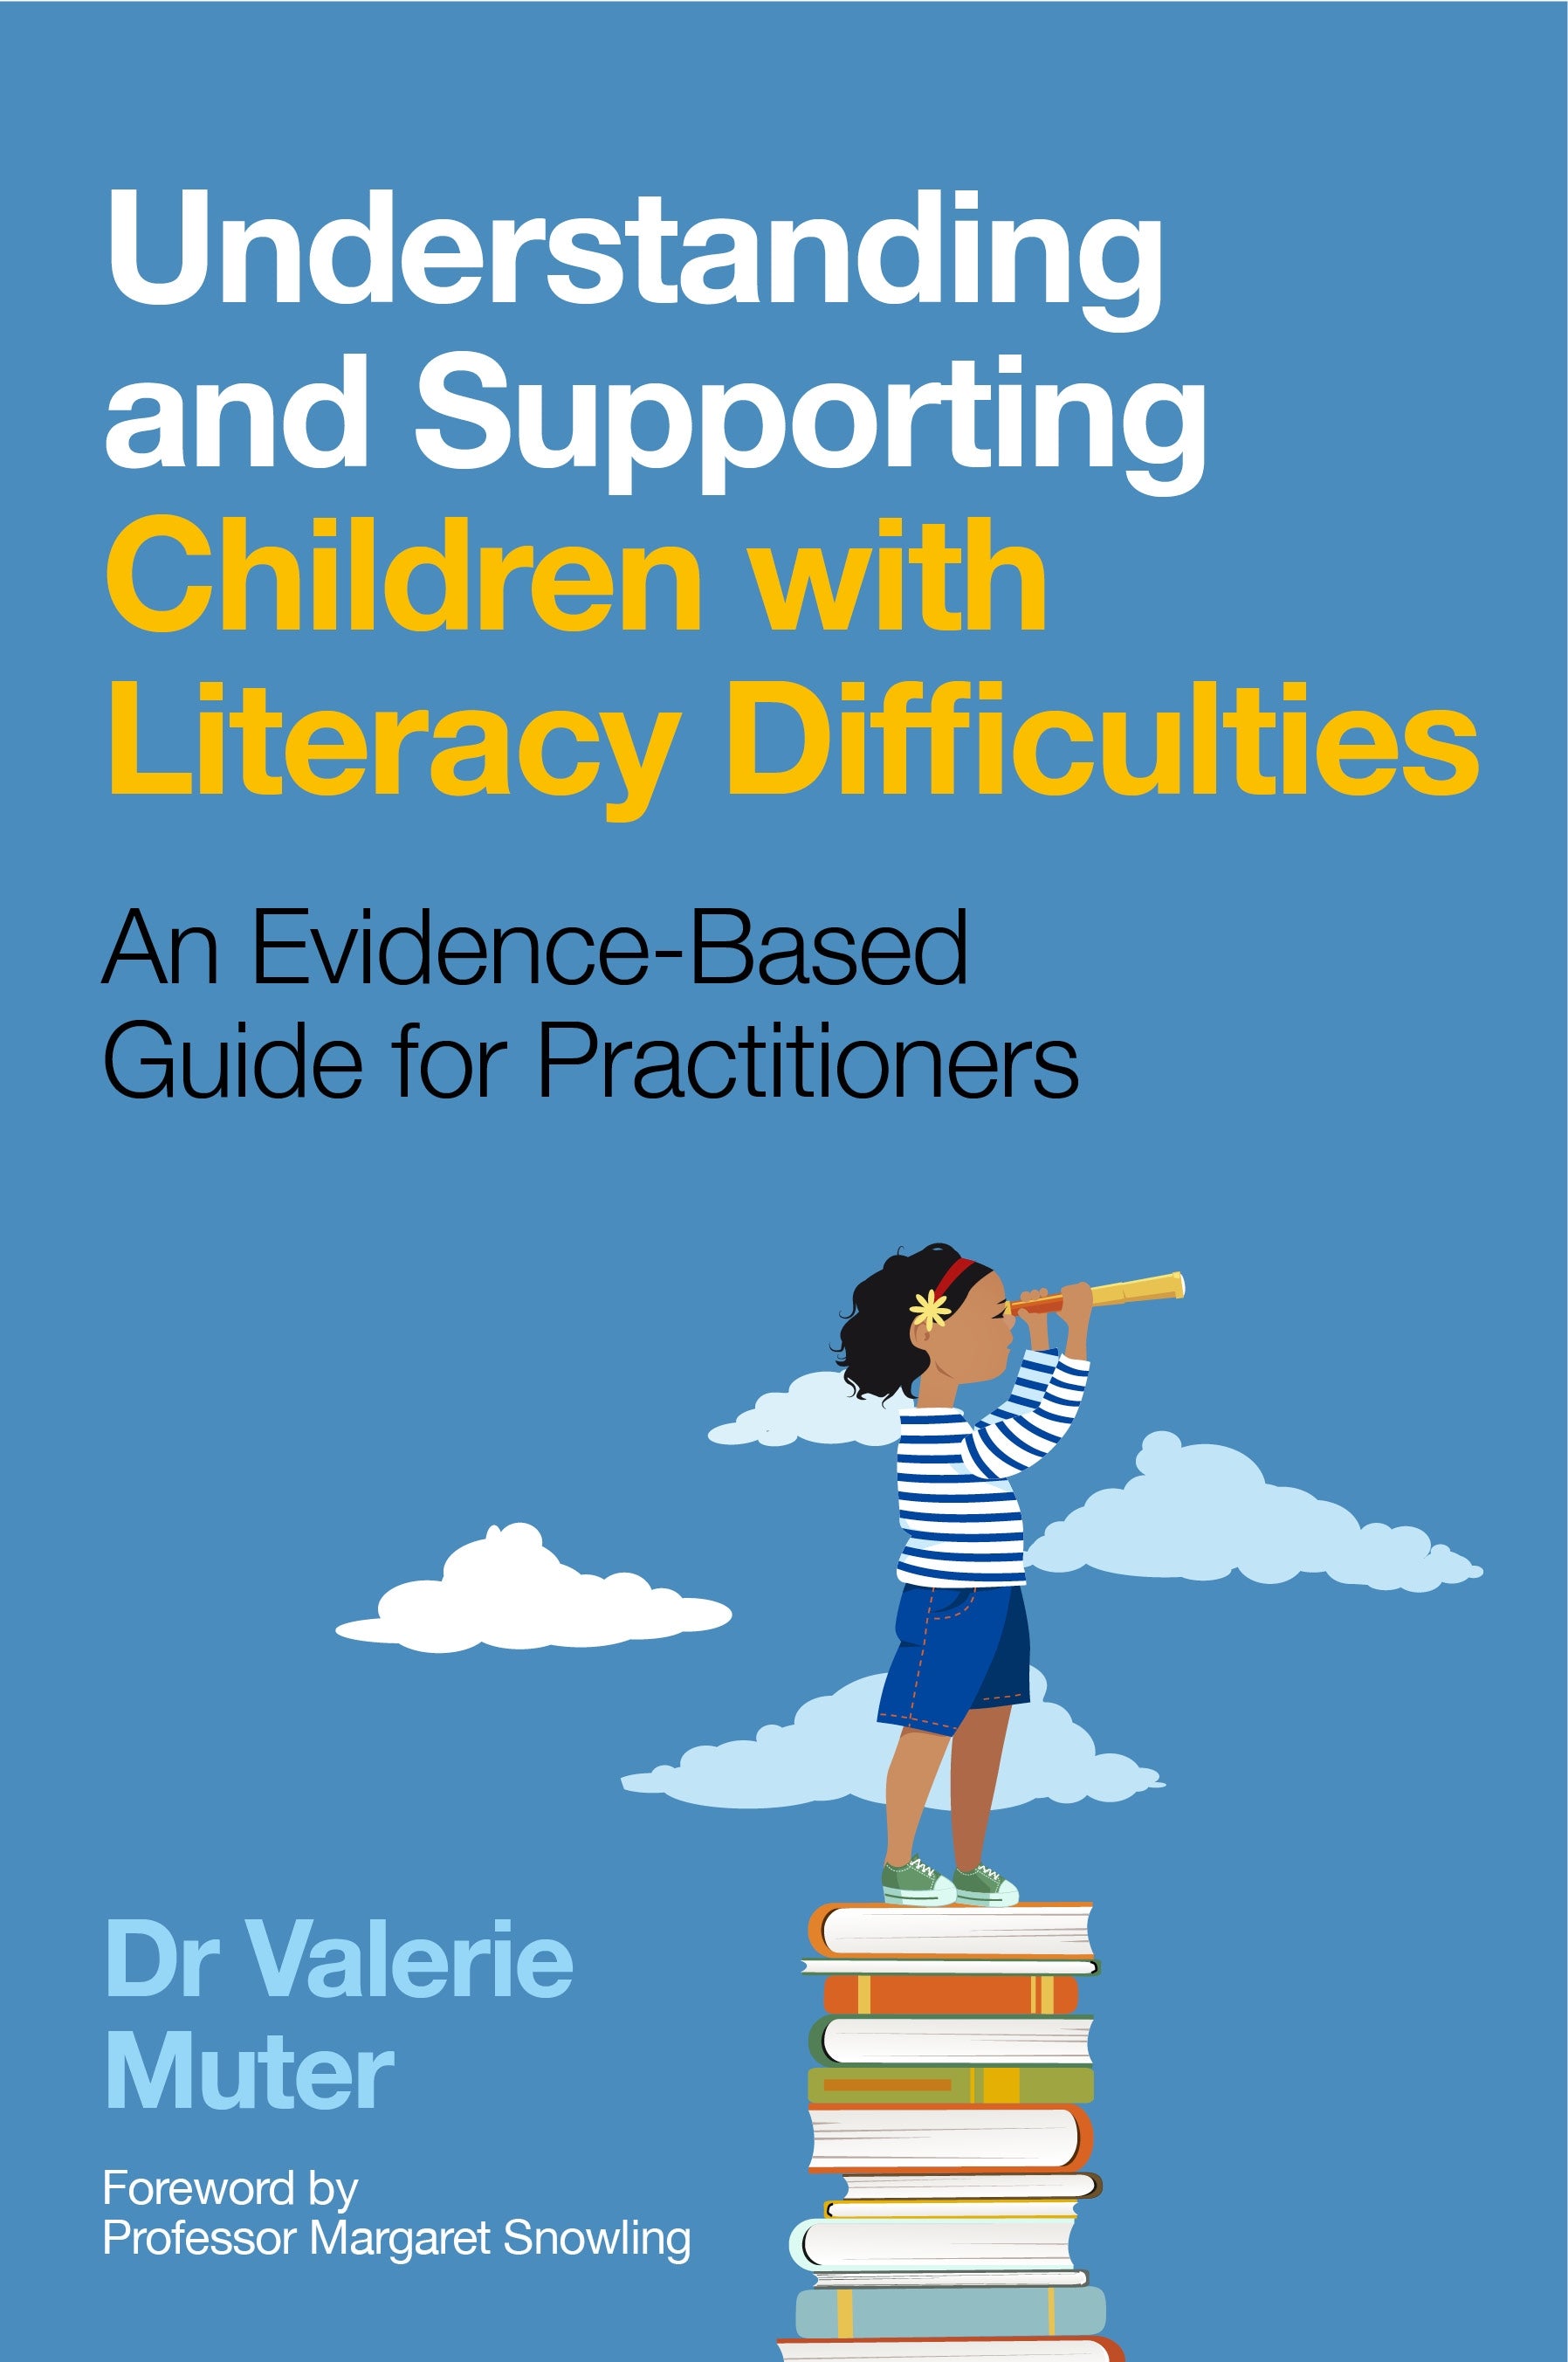 Understanding and Supporting Children with Literacy Difficulties by Valerie Muter, Maggie Snowling